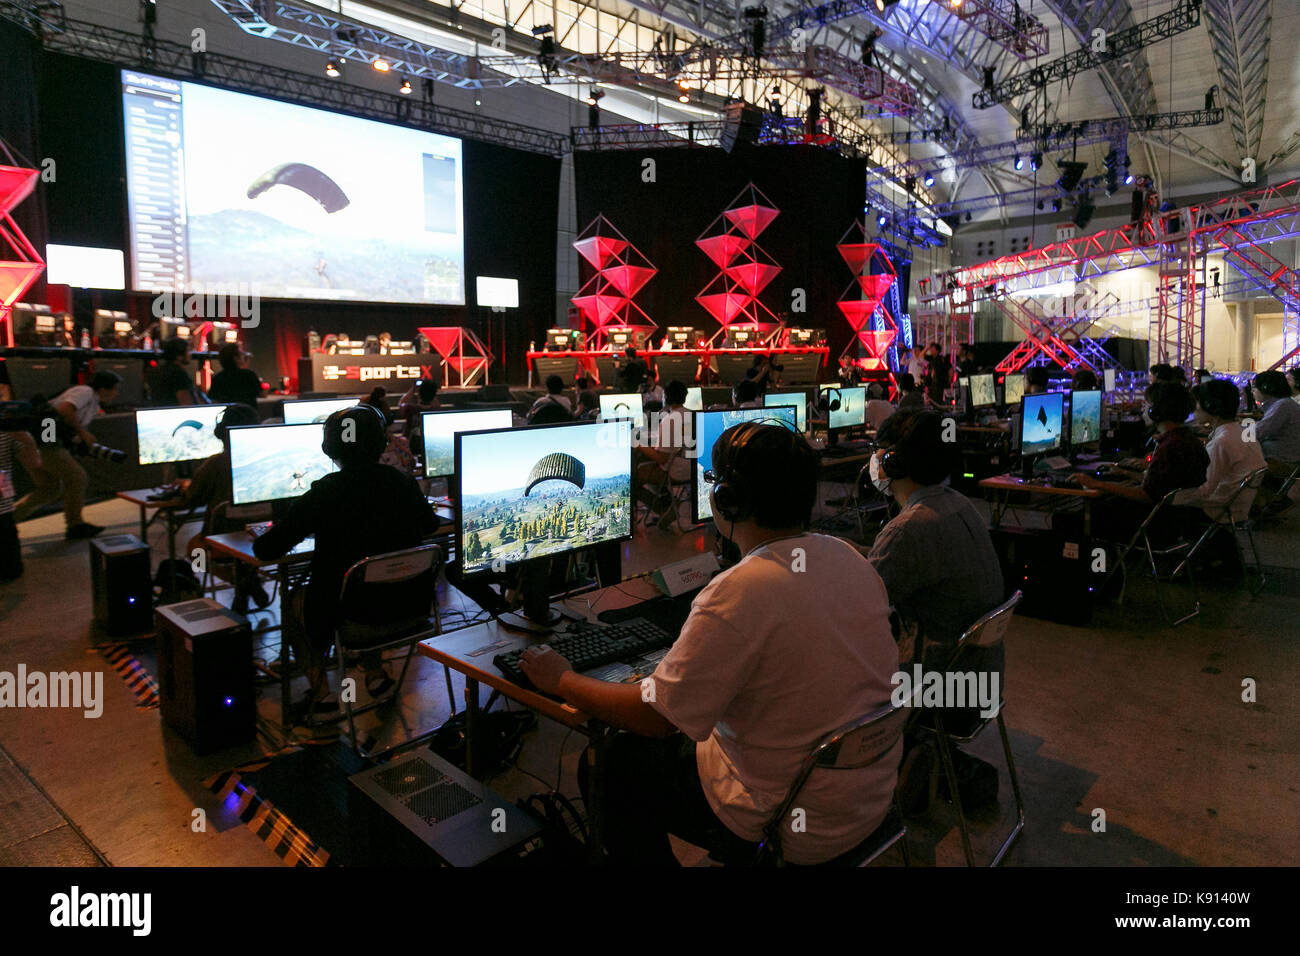 Chiba, Japan. 21st Sep, 2017. E-Sports players compete during the Tokyo Game Show (TGS 2017) on September 21, 2017, Chiba, Japan. This year's event hosts 609 companies from 36 different countries, introducing 1,317 video game titles for smartphones, games consoles, VR, AR and MR platforms. The show, which expects to attract 250,000 visitors, runs until September 24 at the International Convention Complex Makuhari Messe in Chiba; and will be streamed live around the world. Credit: Rodrigo Reyes Marin/AFLO/Alamy Live News Stock Photo